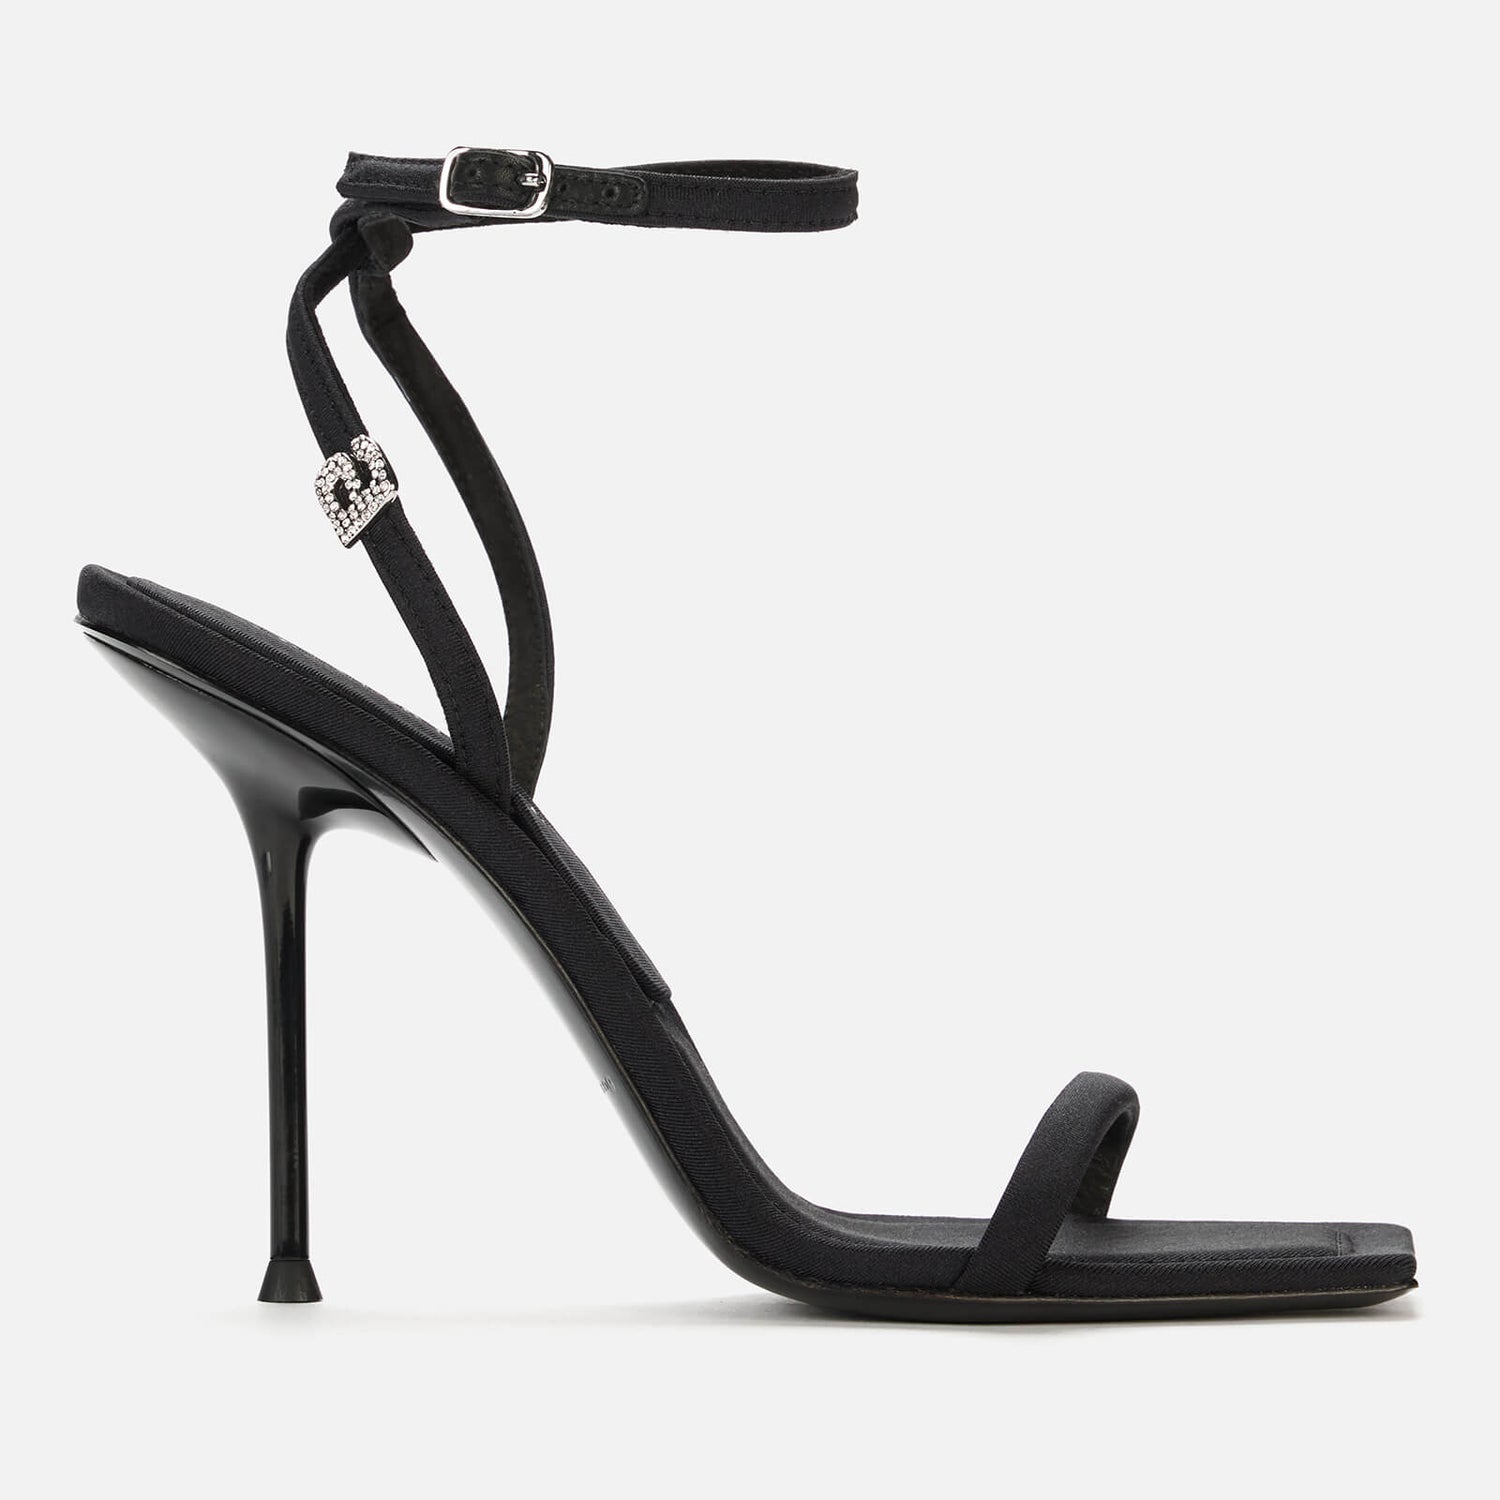 Alexander Wang Women's Julie Leather Barely There Heeled Sandals - Black - UK 3